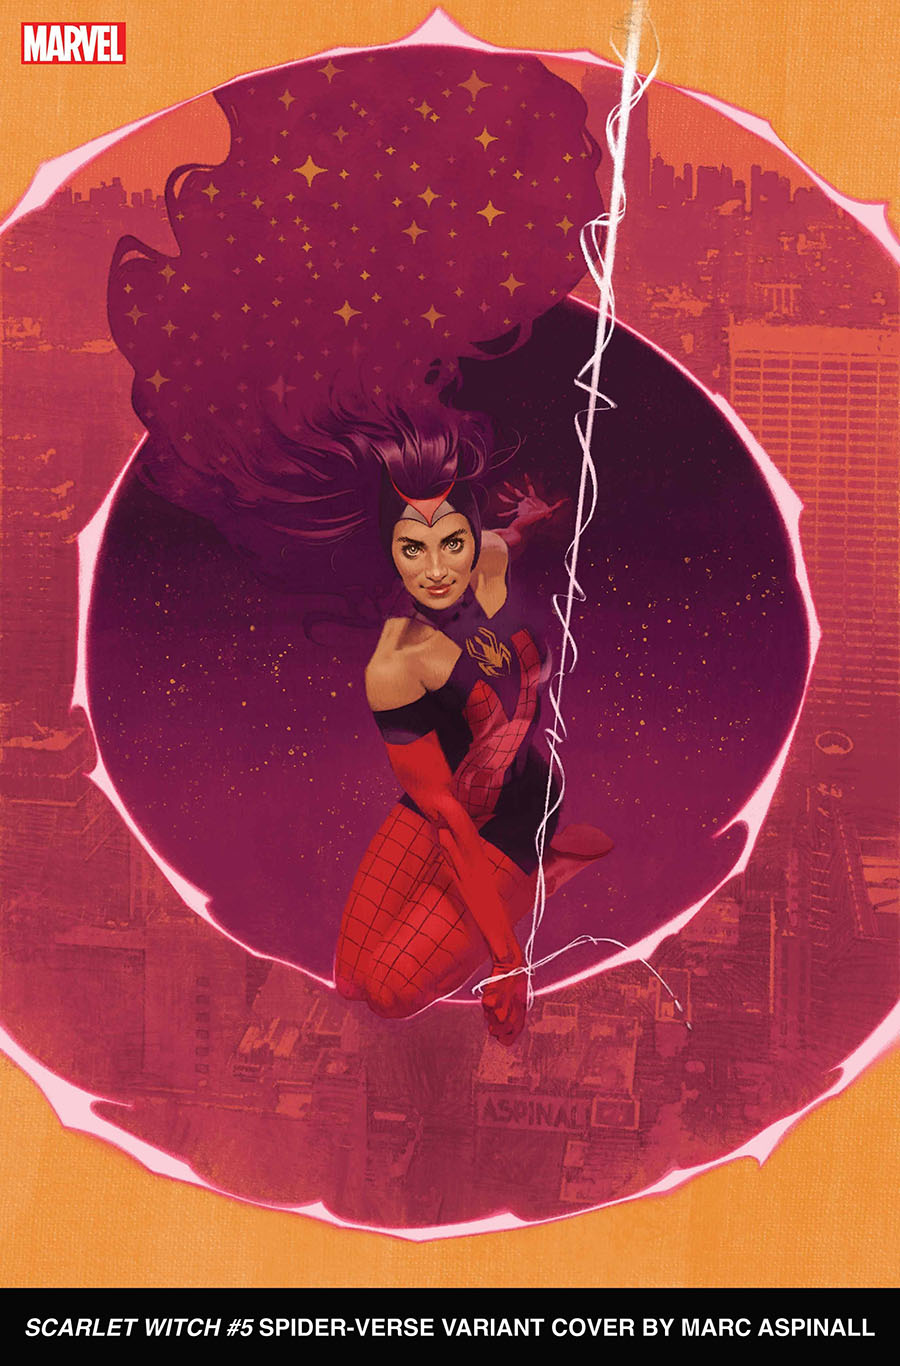 Scarlet Witch Vol 3 #5 Cover B Variant Marc Aspinall Spider-Verse Cover